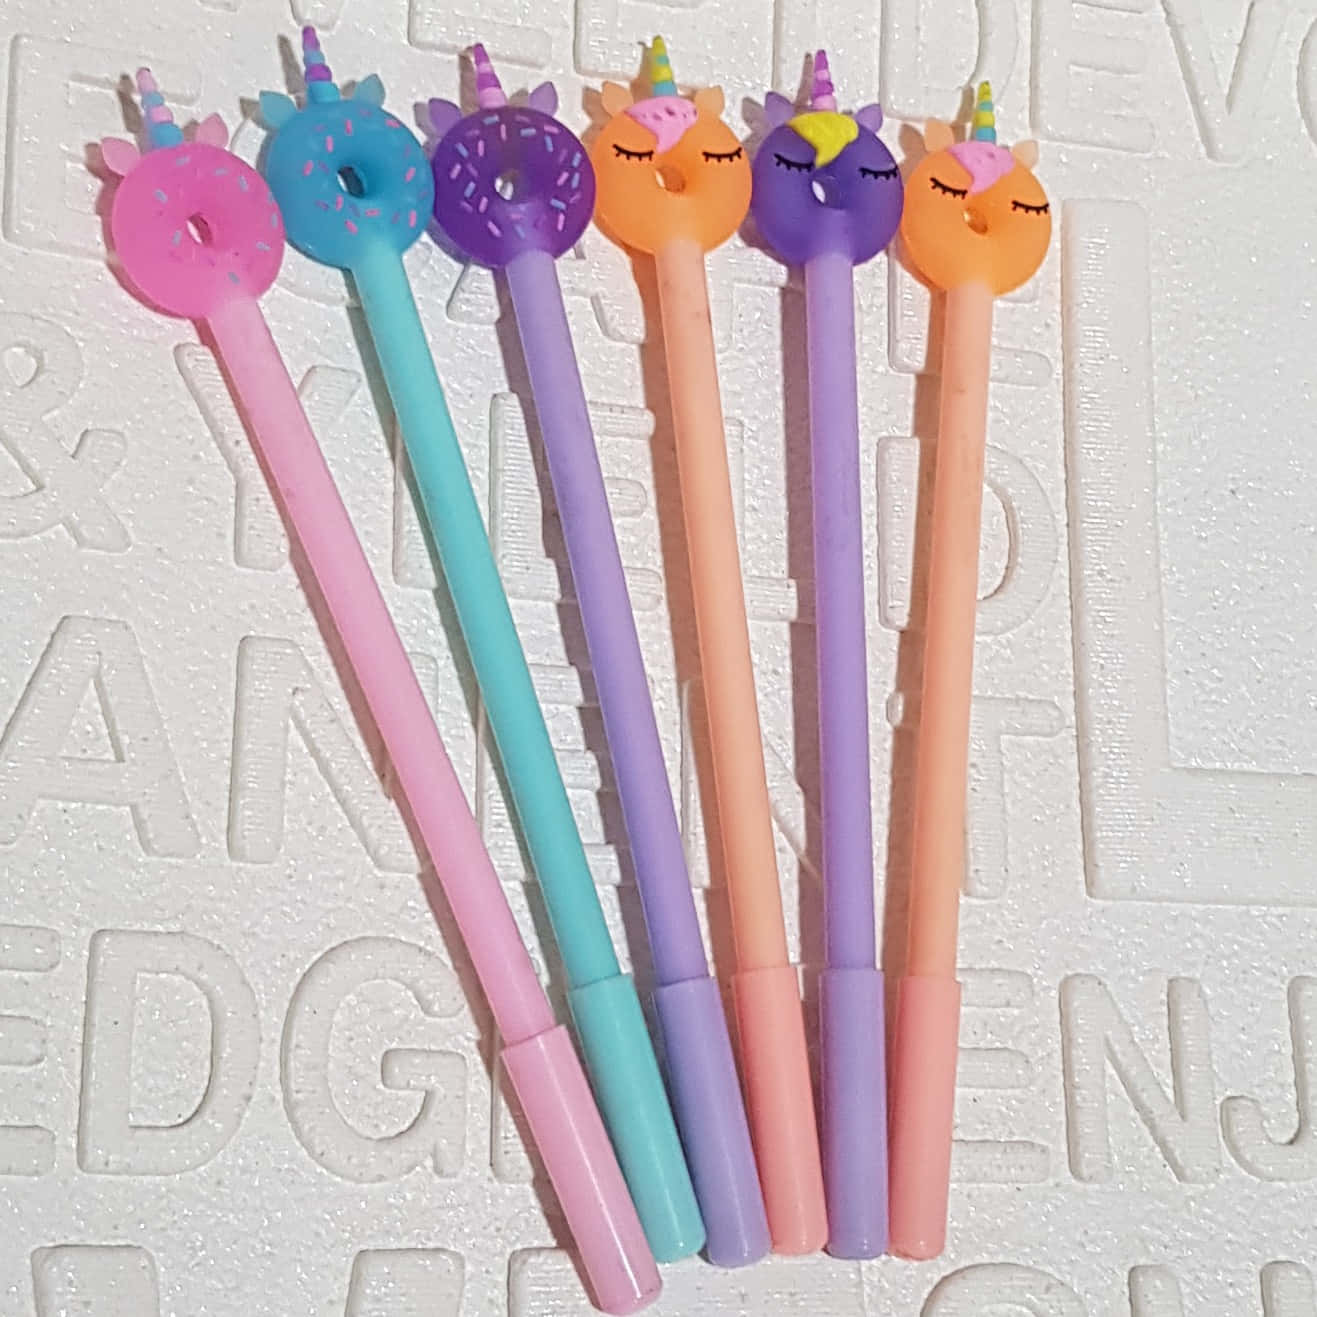 Five Colorful Unicorn Shaped Pens Are Sitting On Top Of Each Other